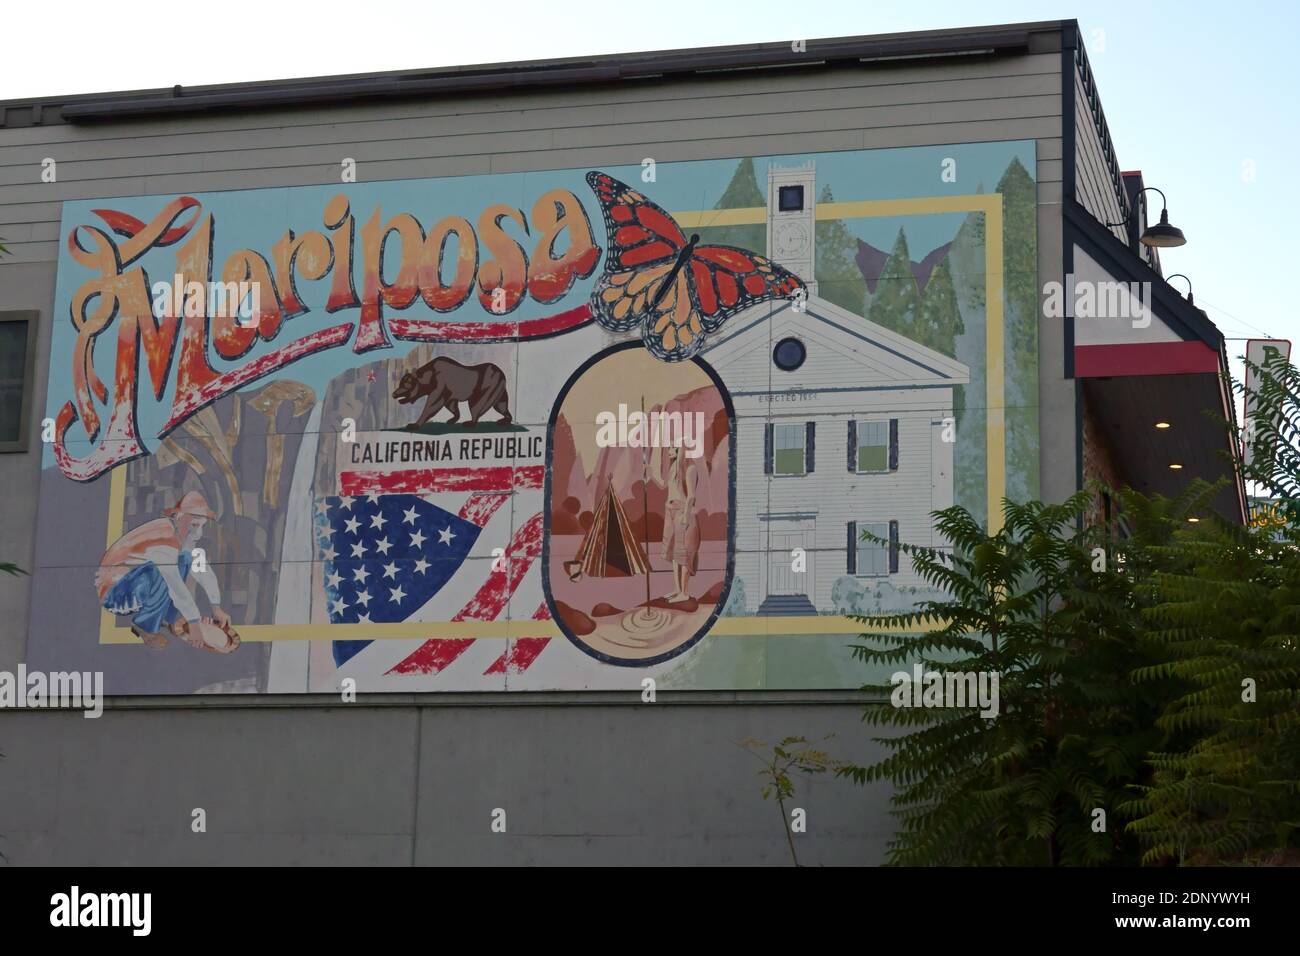 Mariposa, CA / USA - Oct. 18, 2020: A large mural, painted in 2008 and depicting the town’s historic past, is shown on the side of a building. Stock Photo